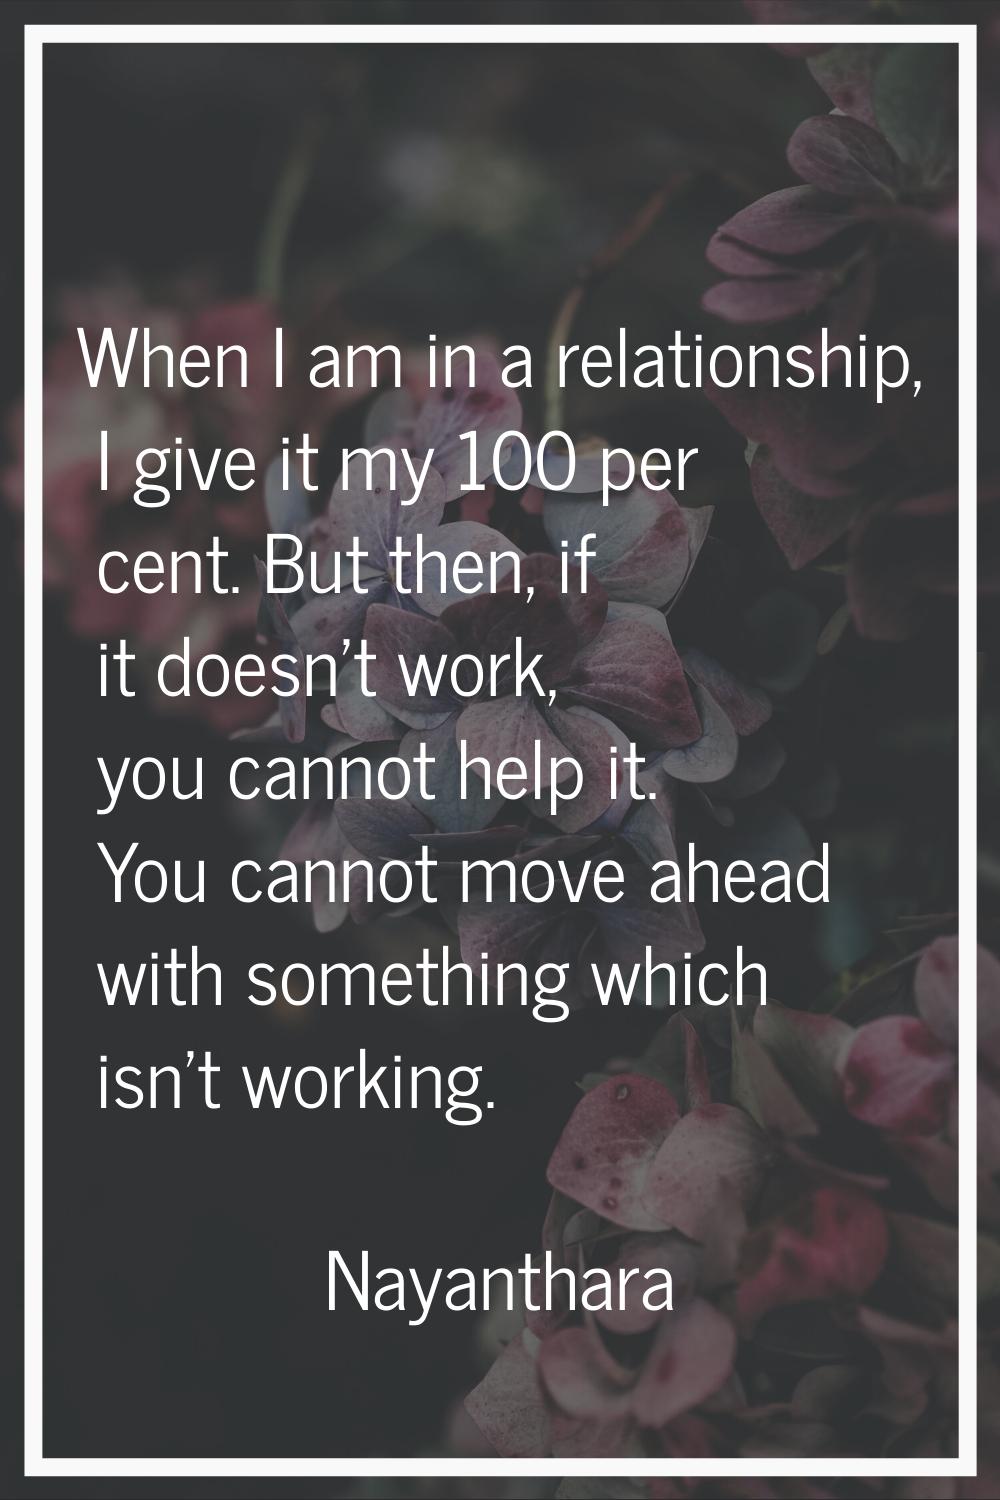 When I am in a relationship, I give it my 100 per cent. But then, if it doesn't work, you cannot he